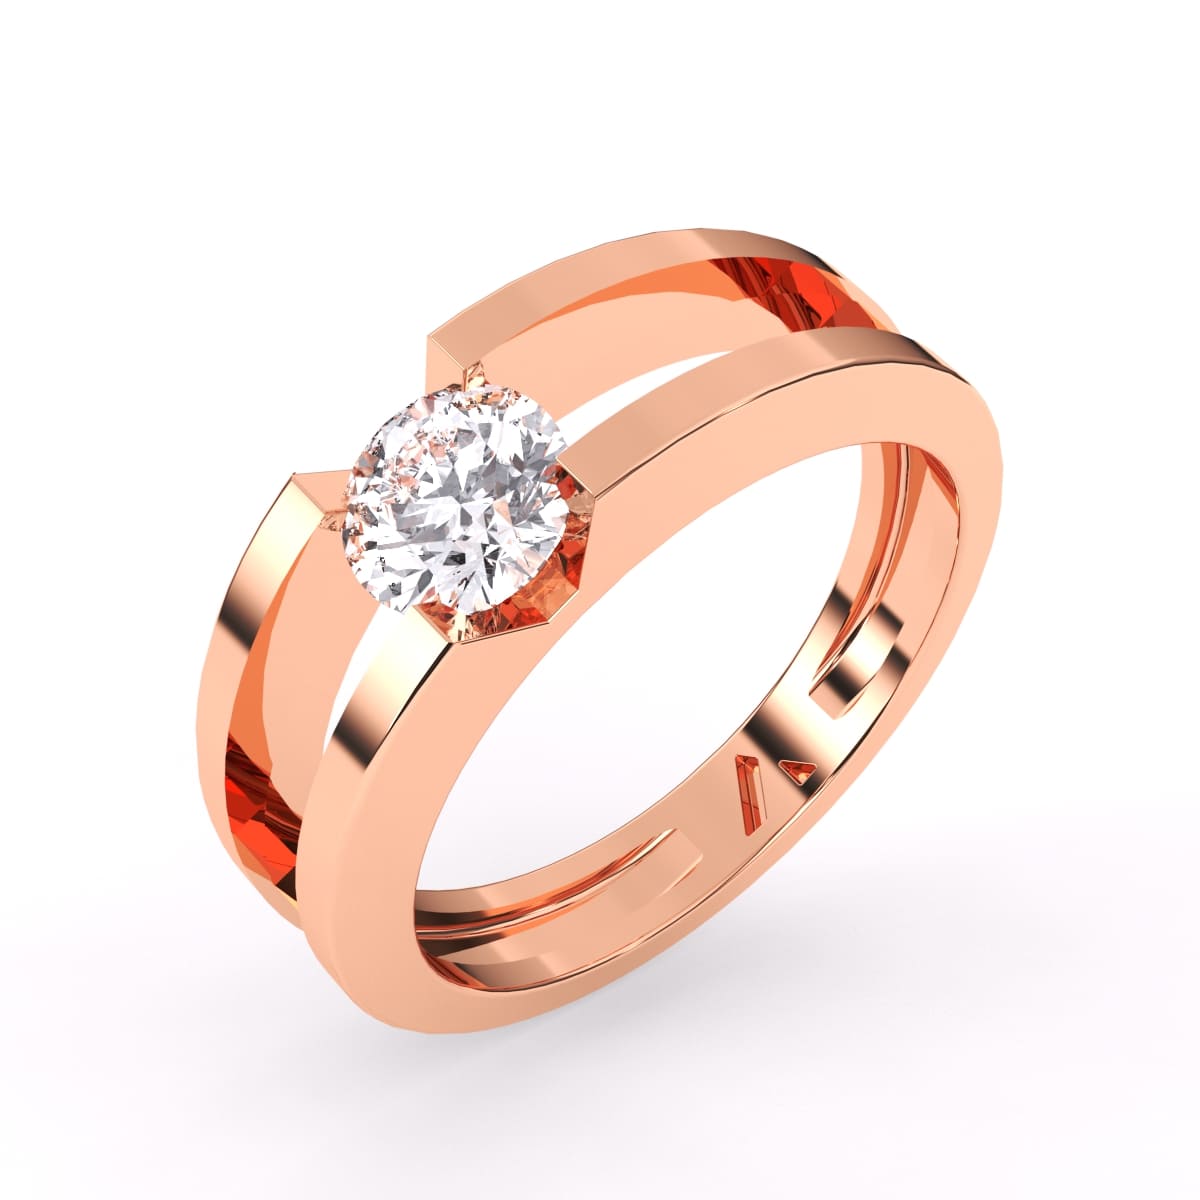 Single Solitaire Engagement Ring - JD SOLITAIRE